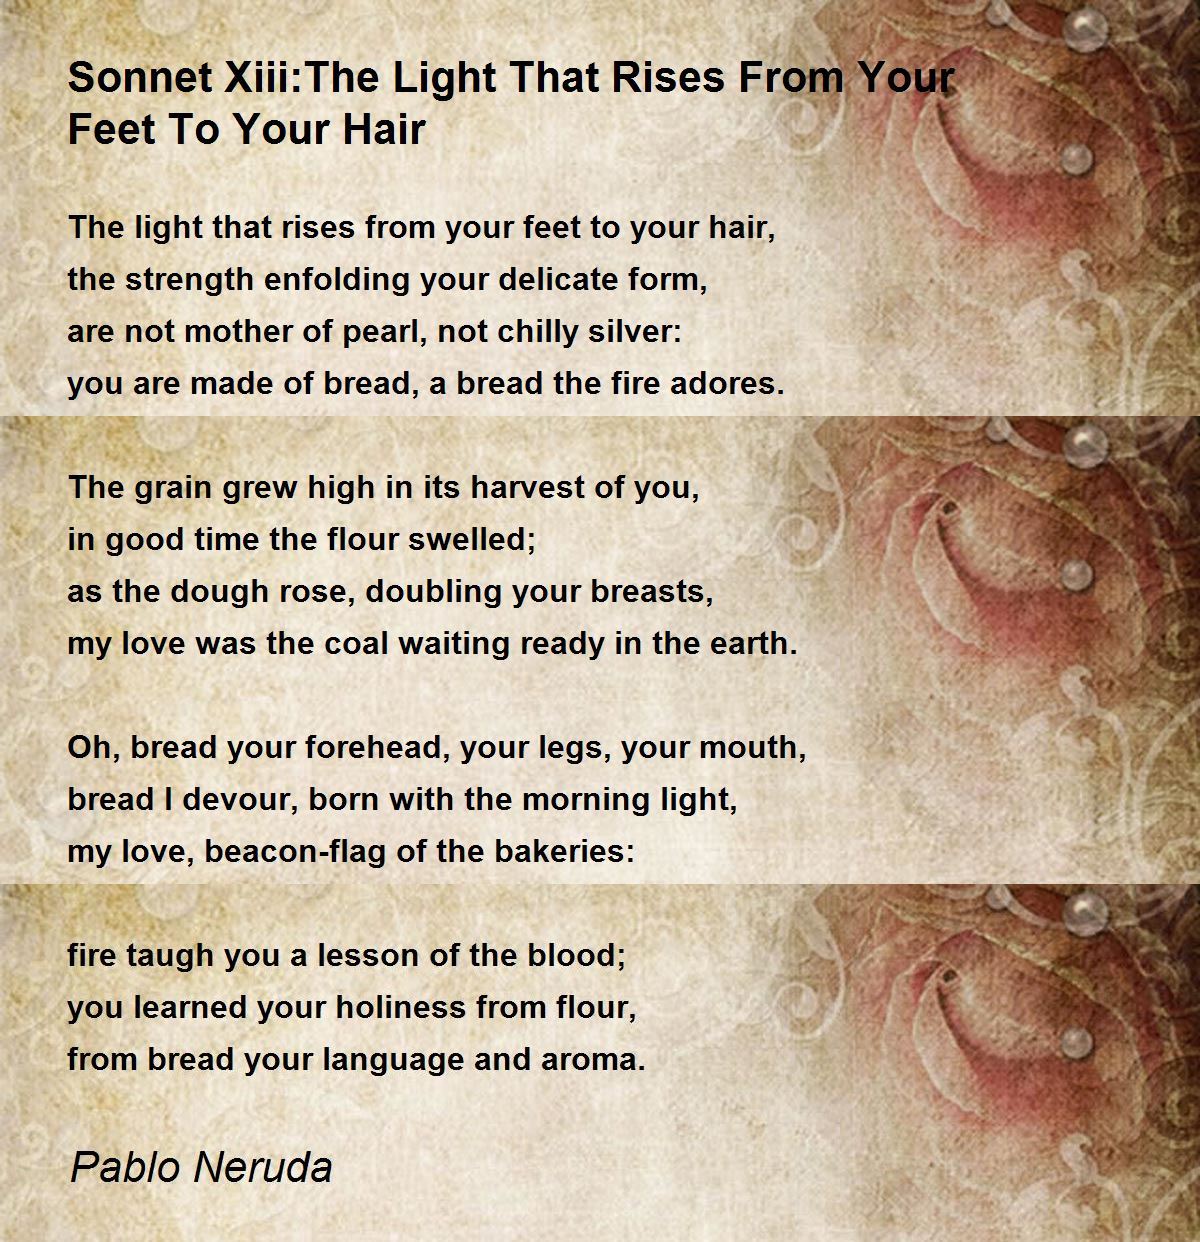 Sonnet Xiii:The Light That Rises From Your Feet To Your 